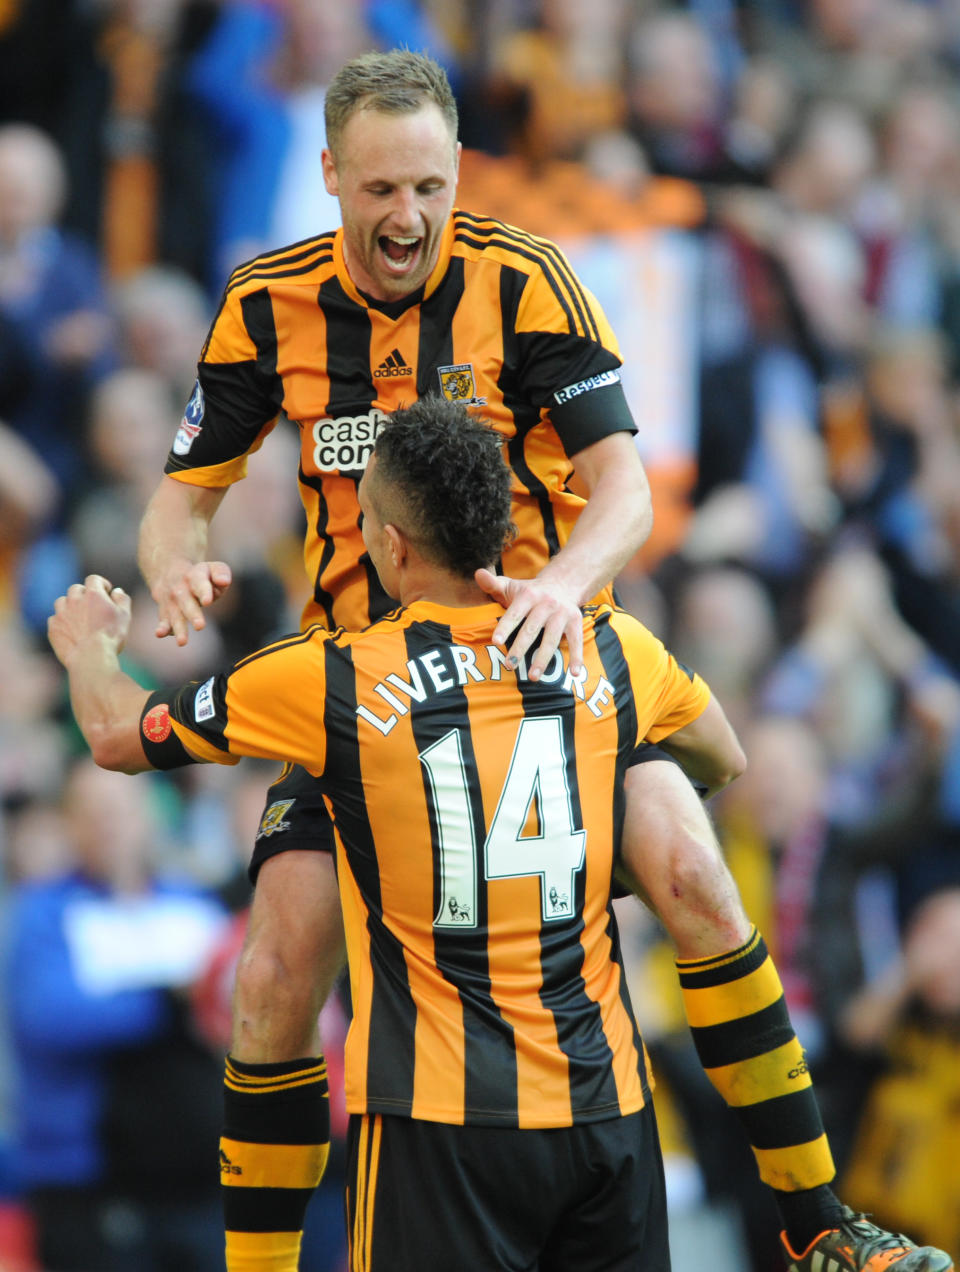 Hull City's David Meyler, top, celebrates with teammate Jake Livermore after scoring against Sheffield United during their English FA Cup semifinal soccer match between Hull City and Sheffield United at Wembley Stadium, London, England, Sunday, April 13, 2014. (AP Photo/Rui Vieira)